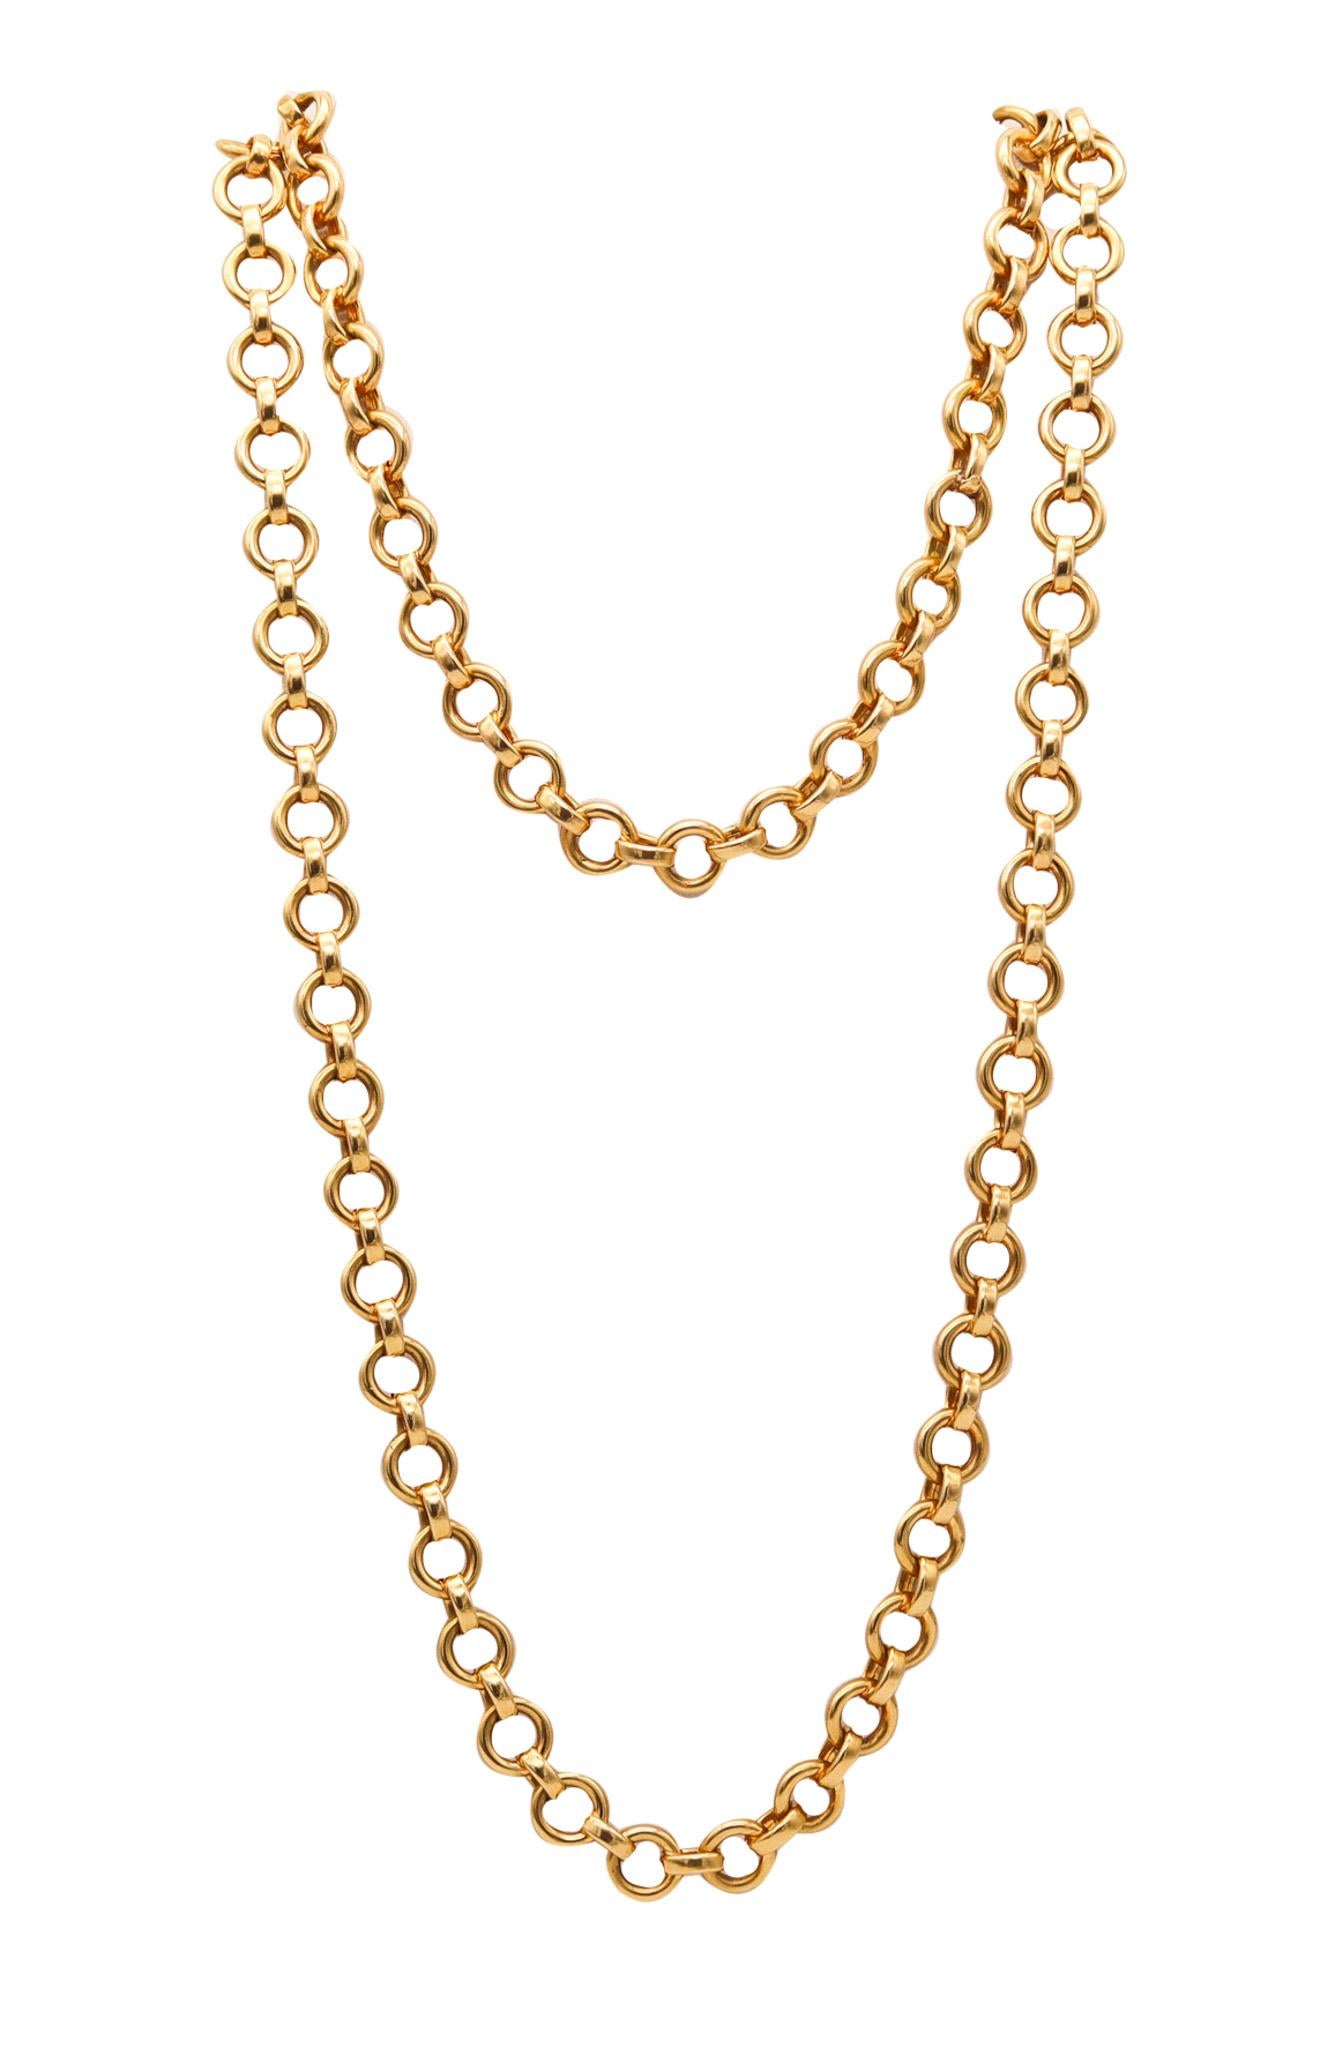 Bruno Dal Lago 1970 Vicenza Modernist Links Chain In Polished 18Kt Yellow Gold